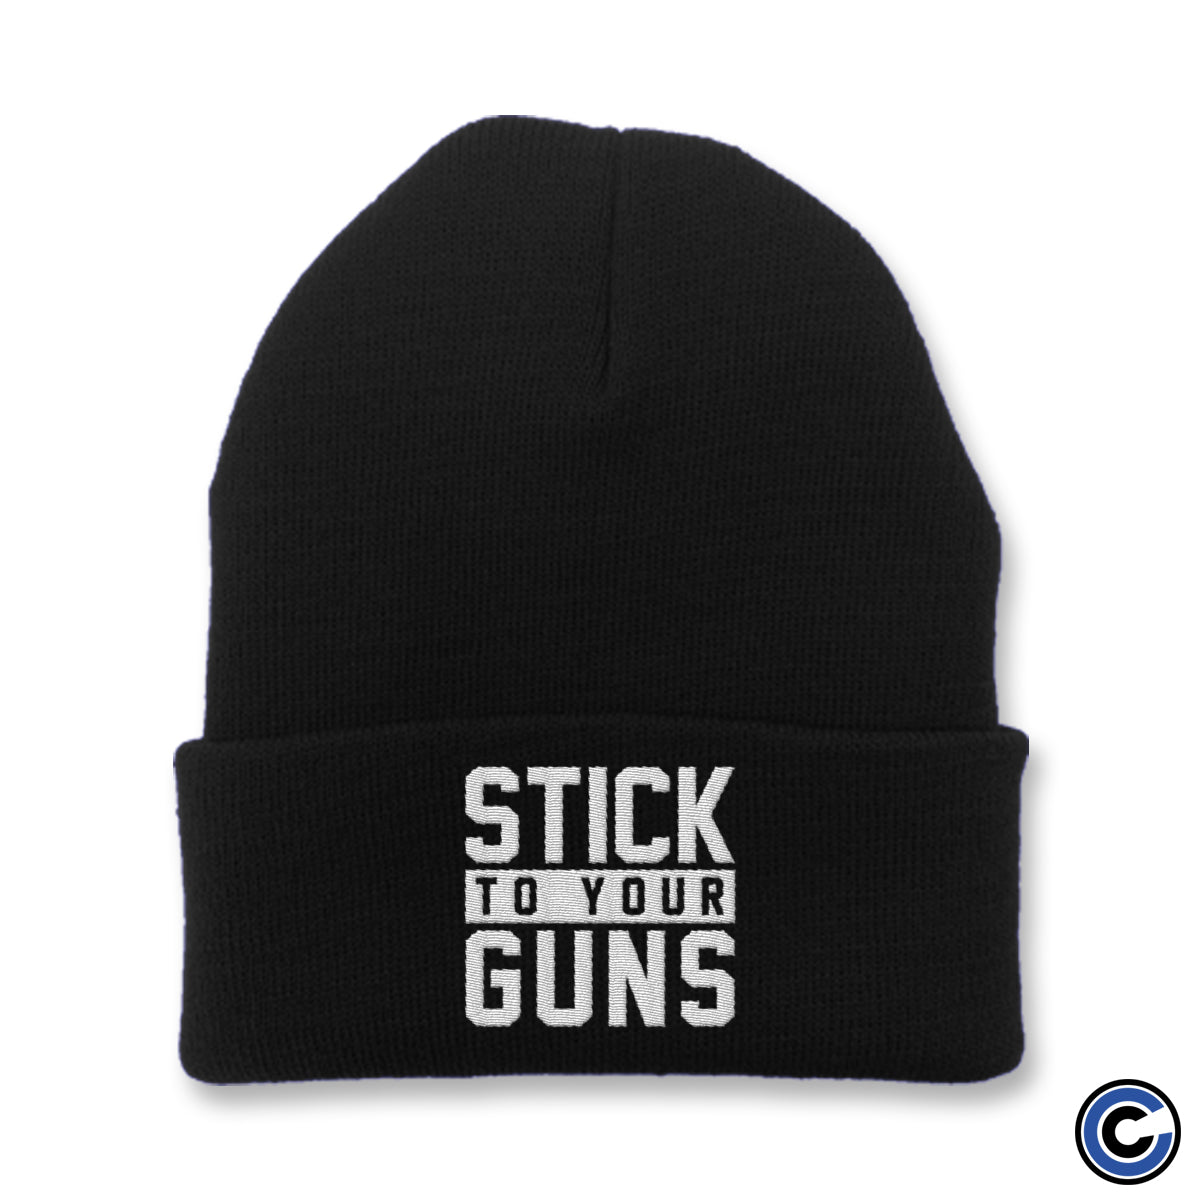 Stick To Your Guns "Stacked" Beanie